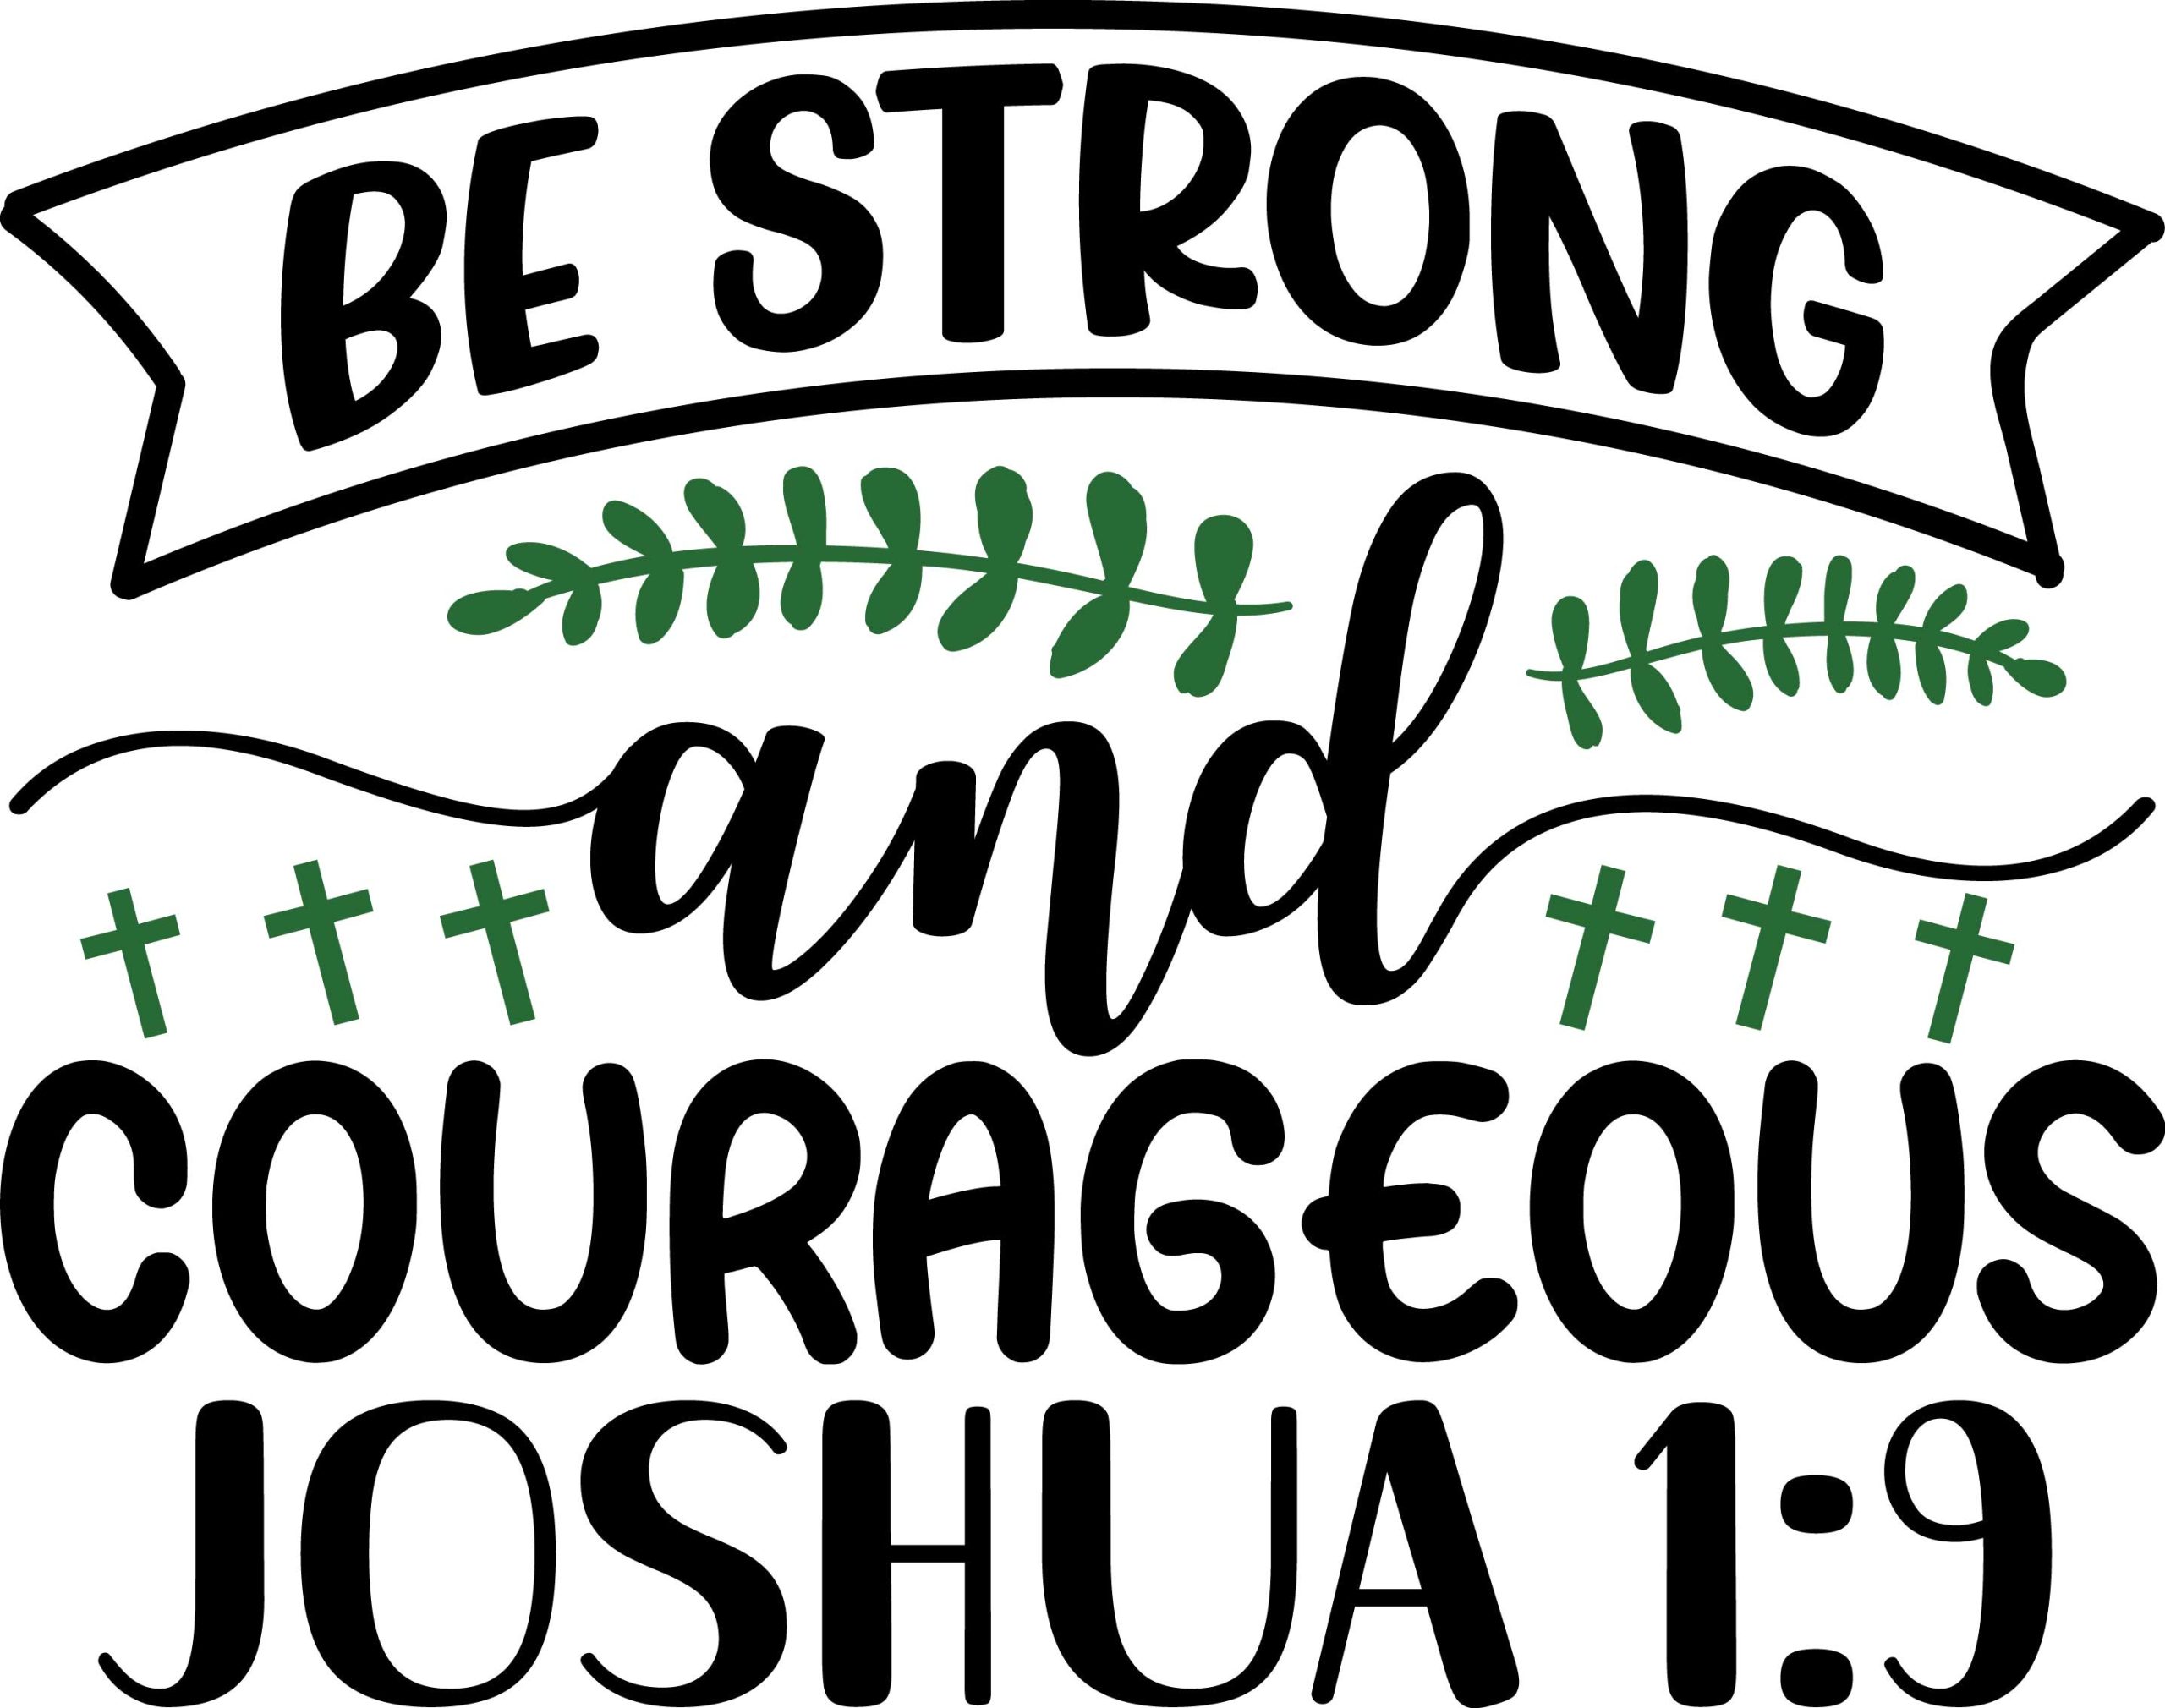 Be strong and courageous Joshua 1:9, bible verses, scripture verses, svg files, passages, sayings, cricut designs, silhouette, embroidery, bundle, free cut files, design space, vector